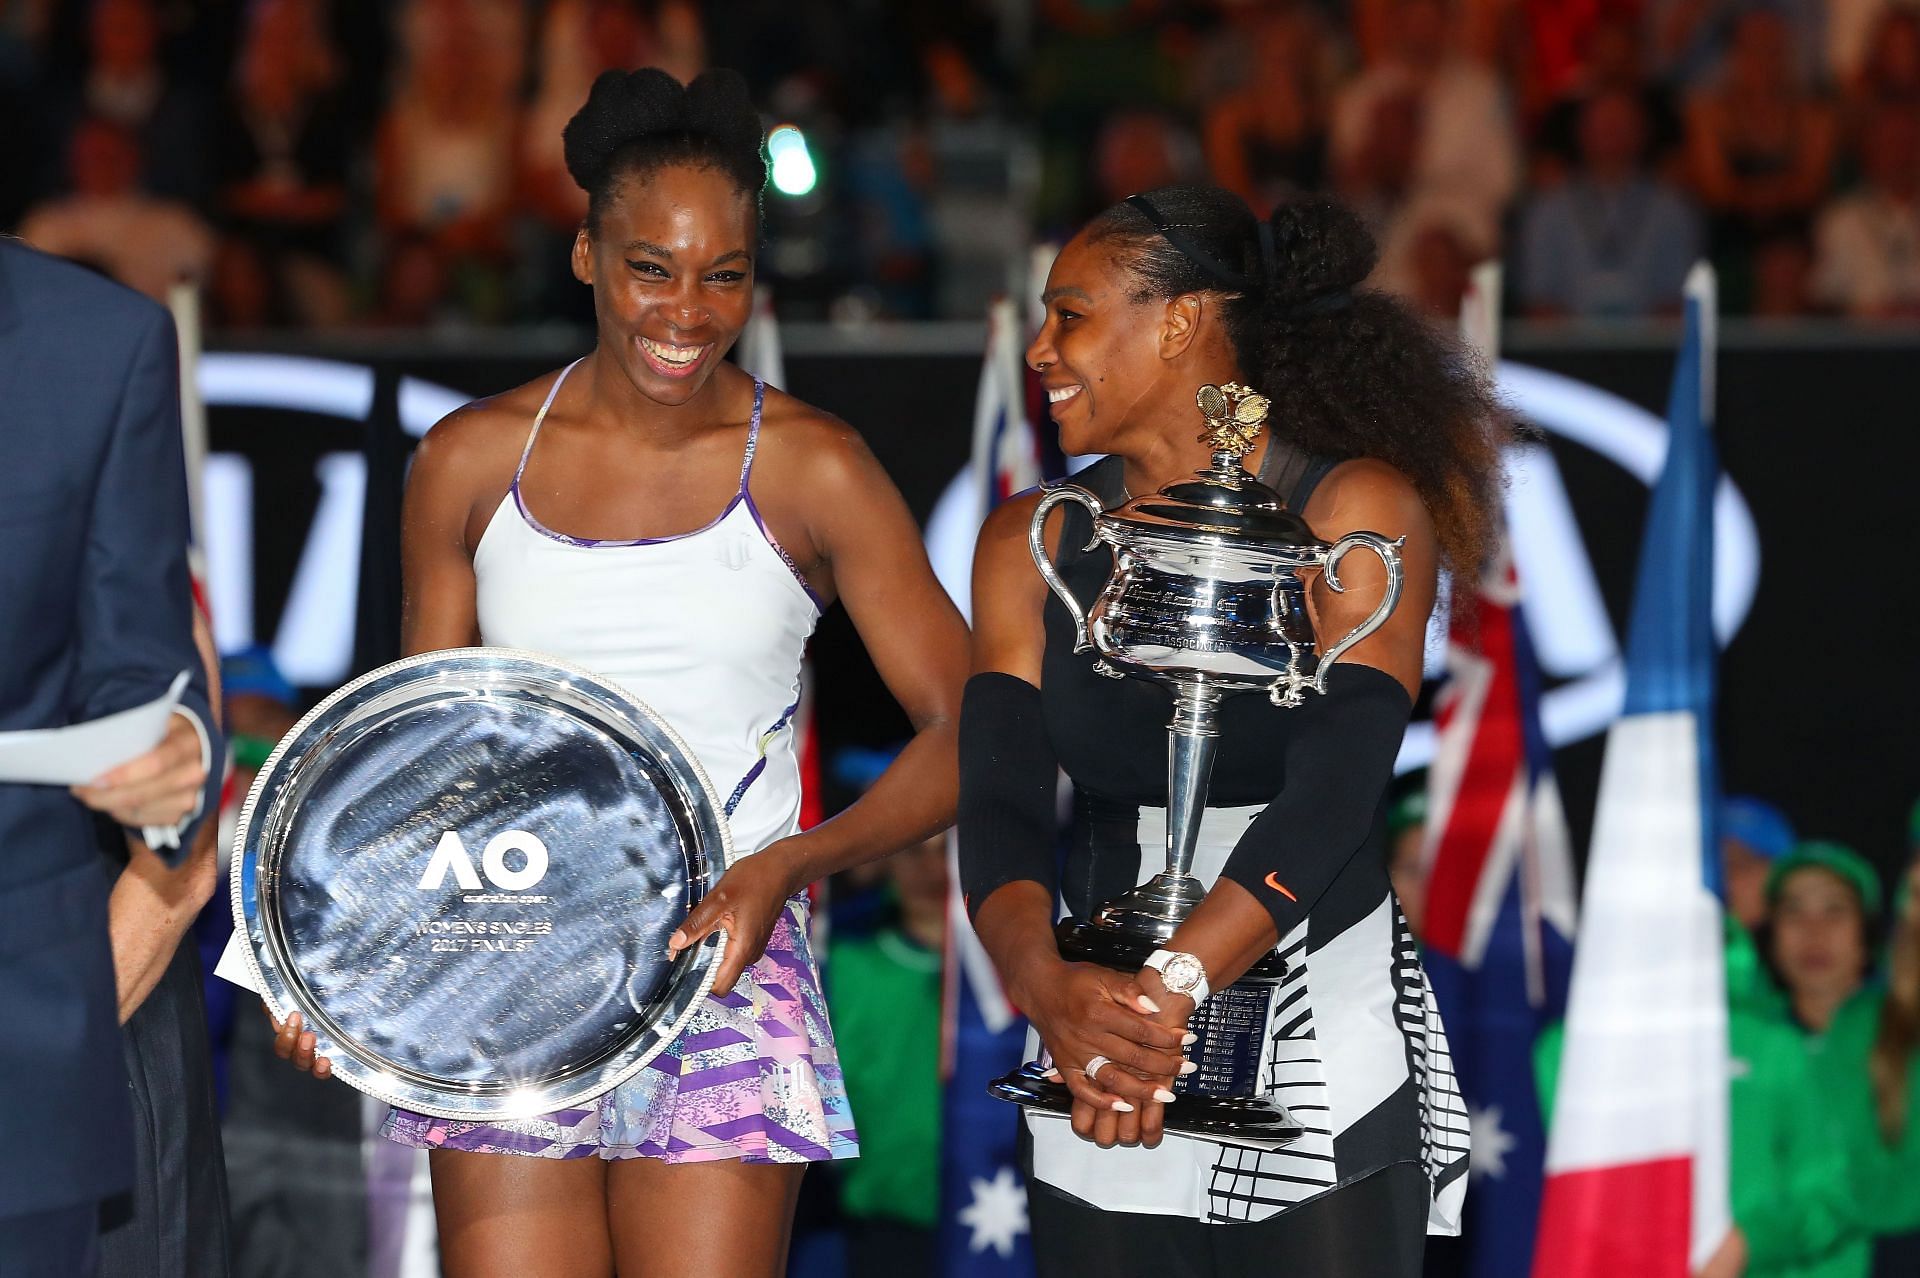 The Williams sisters at the 2017 Australian Open - Day 13